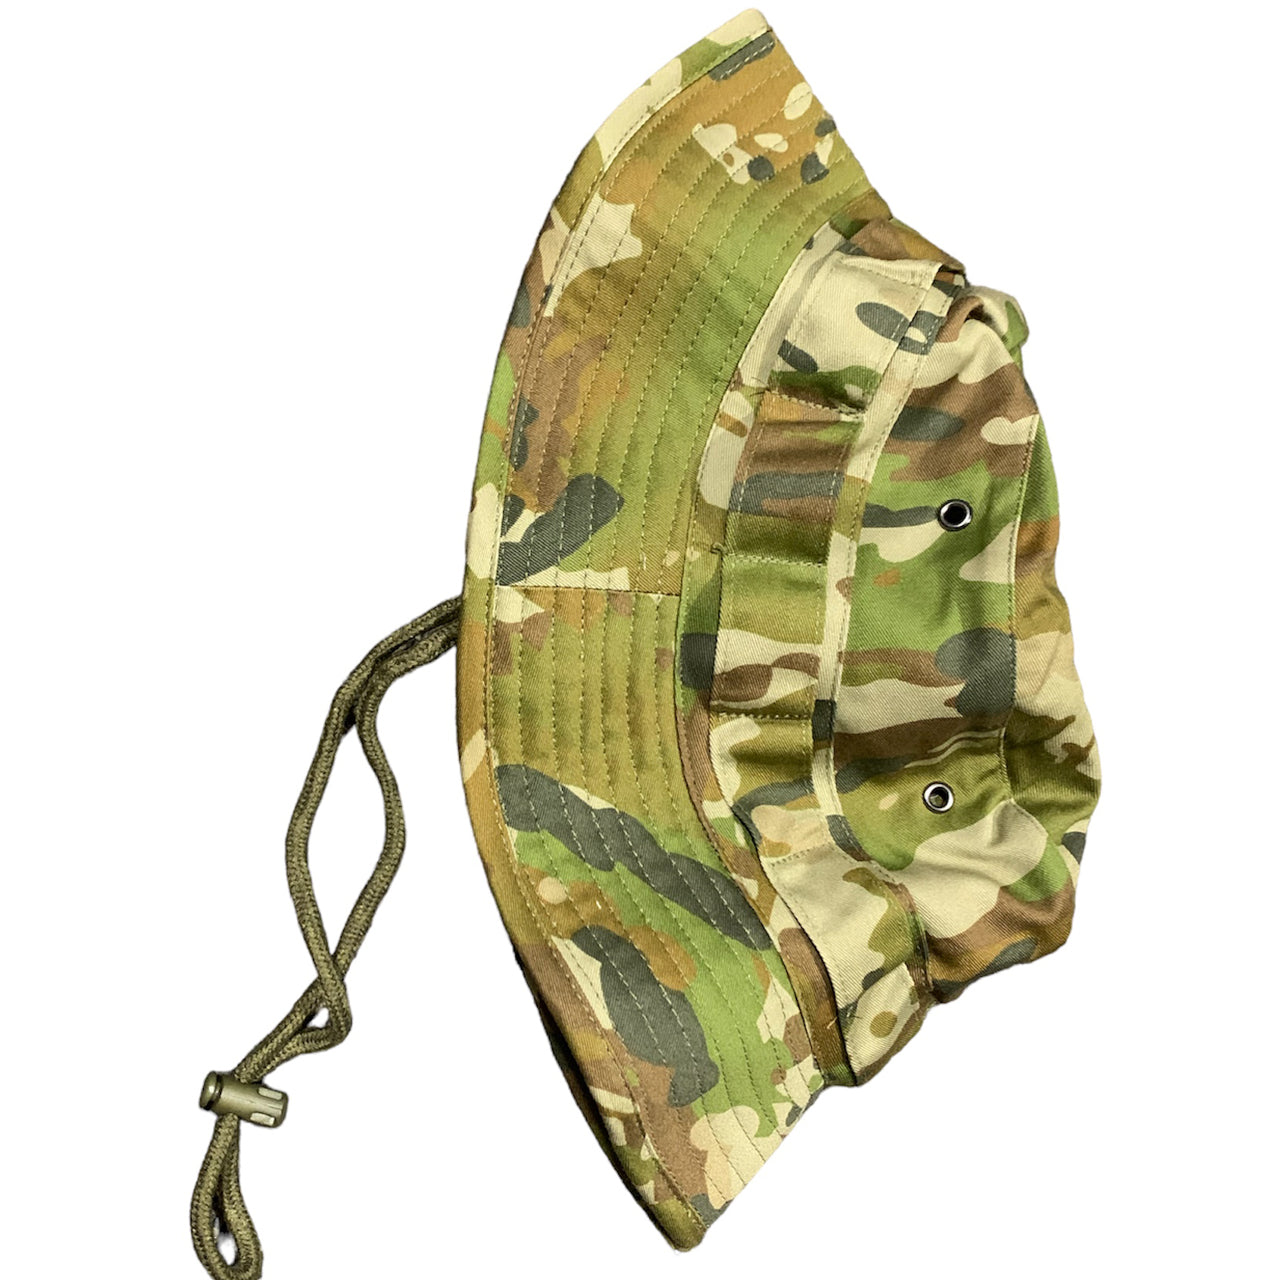 Experience the ultimate in versatility with our Army Australian Multicam Giggle Hat AMCU! Made with 100% cotton, this hat features side loops for adding camouflage or pins, making it perfect for any tactical situation. Don't settle for ordinary, choose the best with our Army style giggle hat. www.defenceqstore.com.au